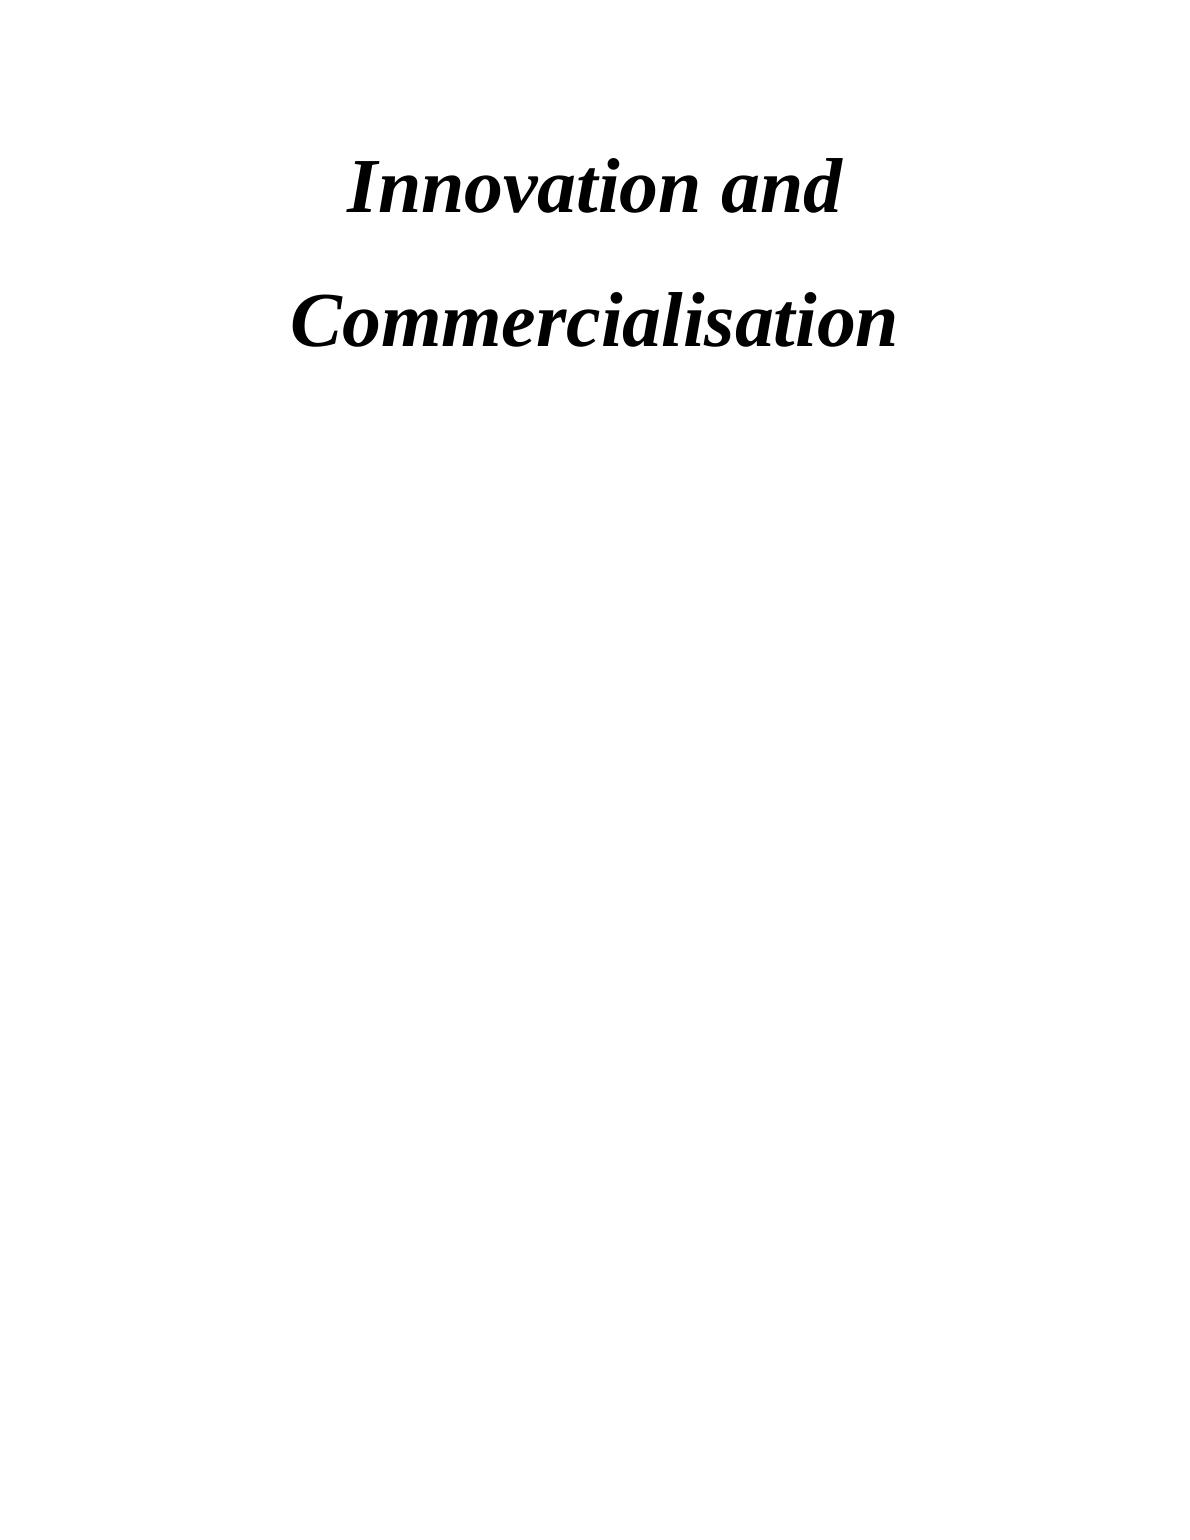 Innovation and Commercialisation in Jernick Recruitment Group : Report_1